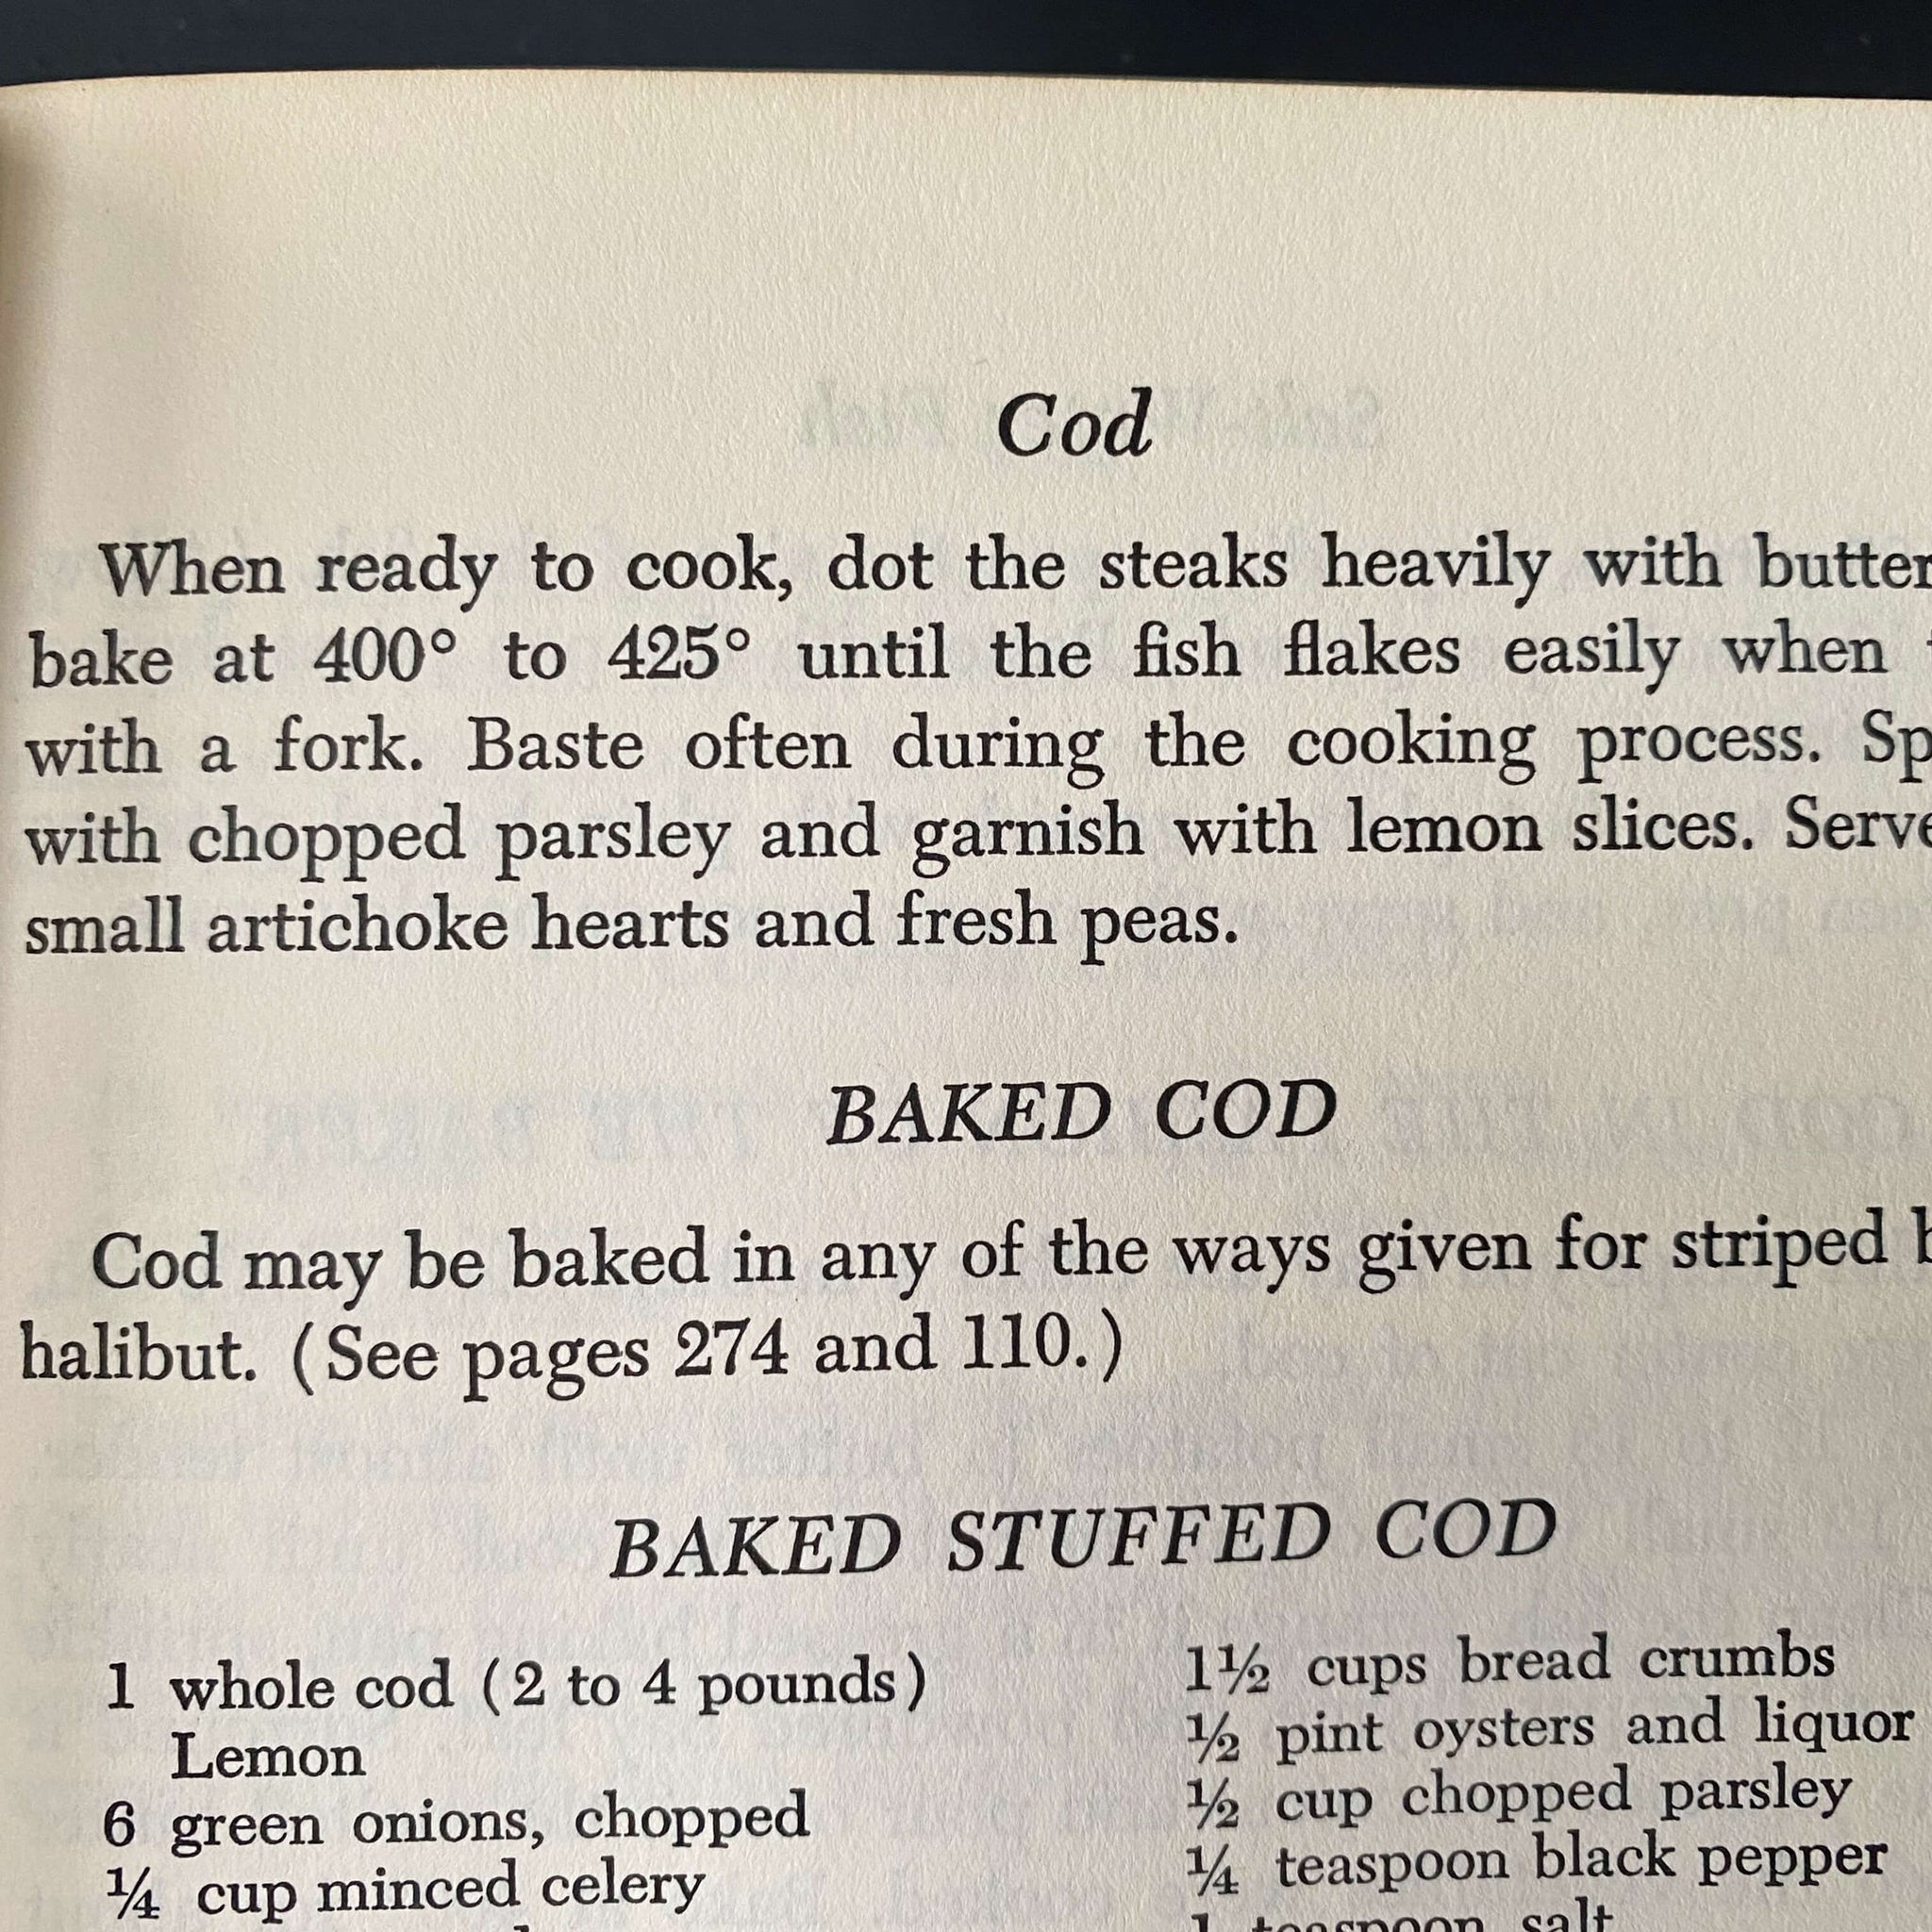 James Beard's Fish Cookery - 1954 Edition Seventh Printing